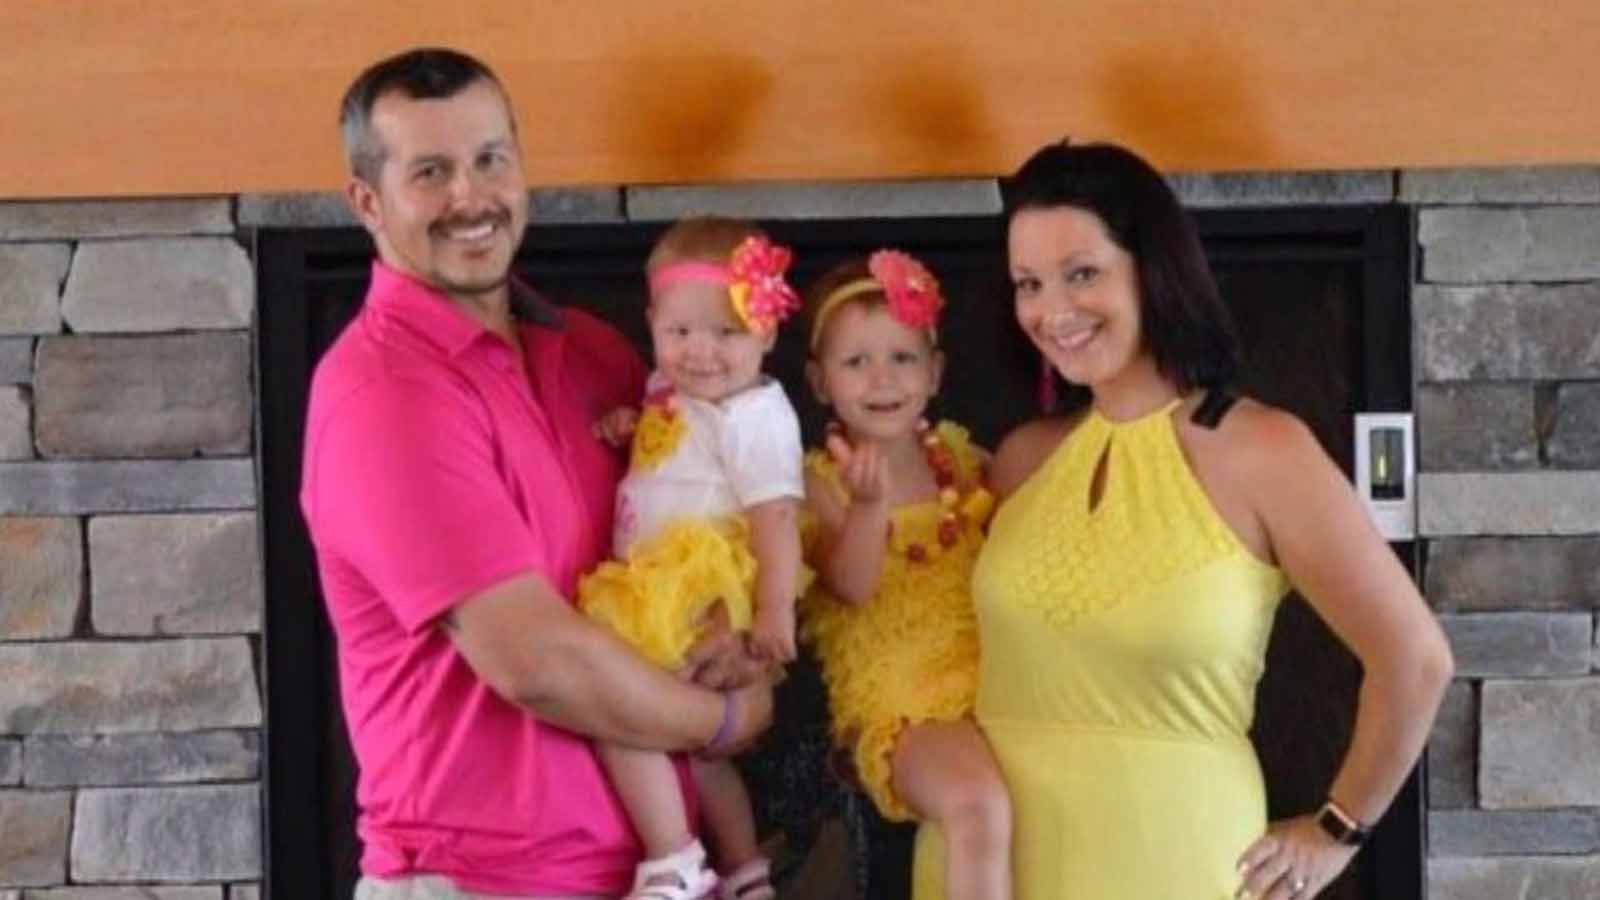 Five life sentences seems like a lot, but it's exactly what Chris Watts deserves after murdering his pregnant wife and two daughters.